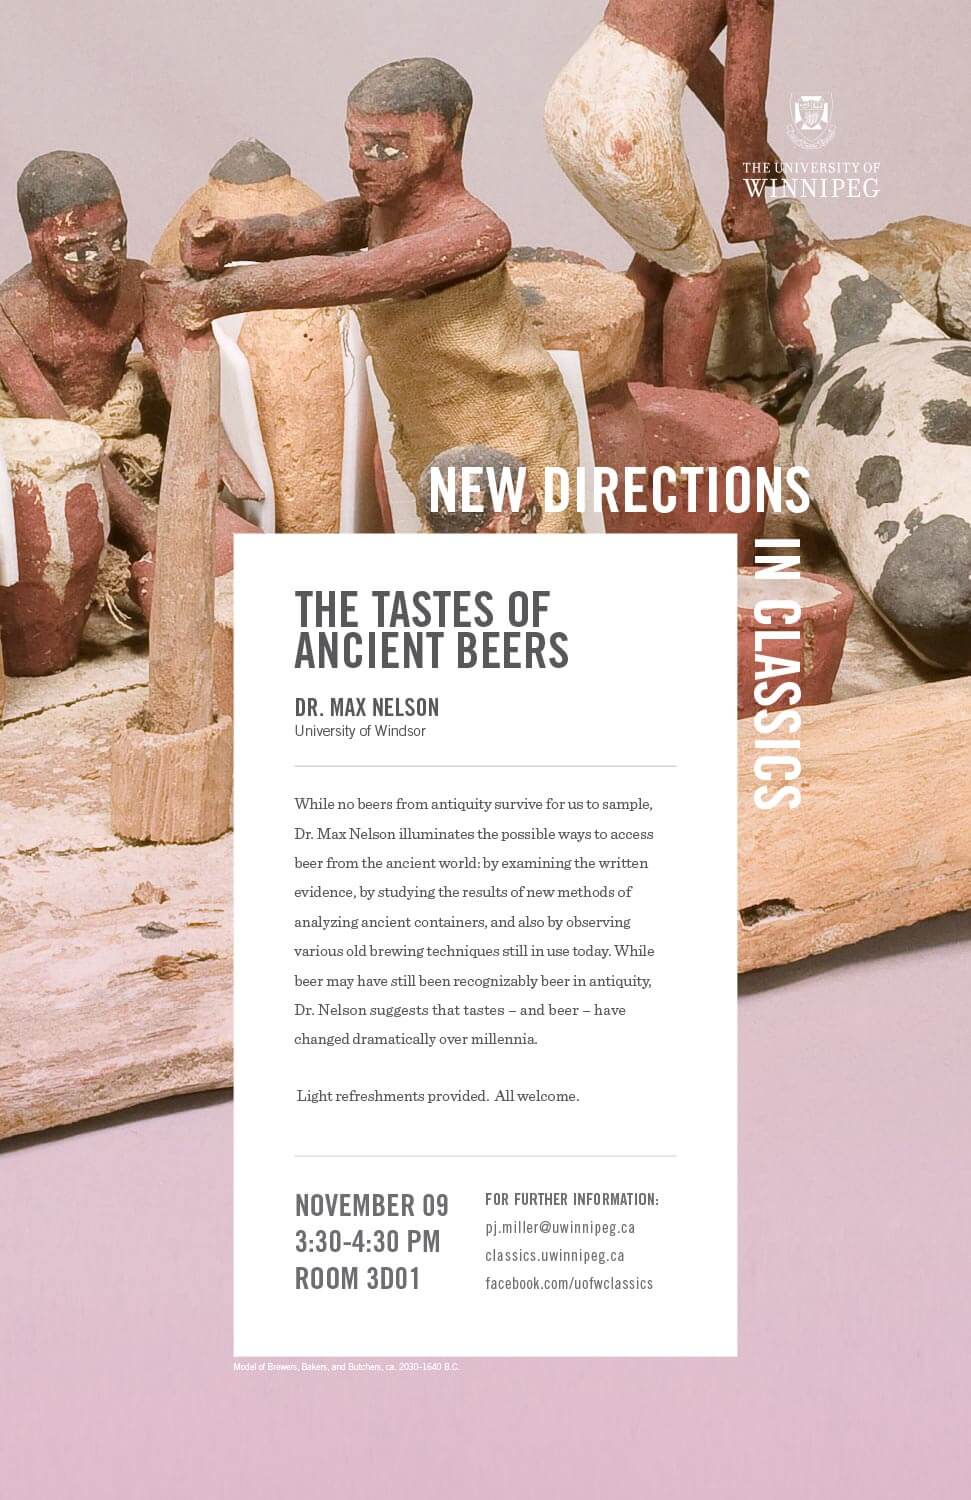 Promotional Poster for Dr. Max Nelson's New Directions in Classics lecture, November 9, 2018 (text on web page)